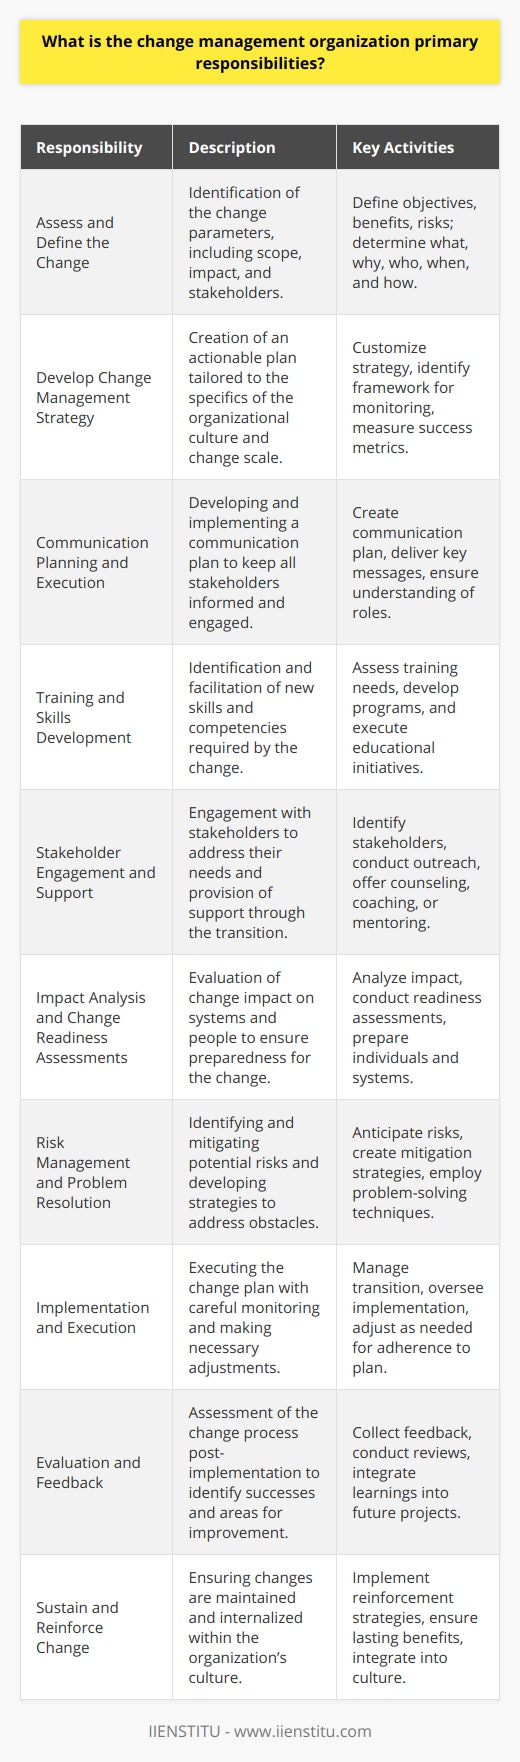 Change management within an organization entails the structured approach and systematic application of knowledge, tools, and resources to deal with change. It involves proactively managing changes in processes, systems, and technologies while helping people to adapt to new situations. The responsibilities of a change management organization like IIENSTITU focus on ensuring that changes are implemented smoothly and successfully to achieve lasting benefits. Here are the primary responsibilities of a change management organization:1. **Assess and Define the Change**: The change management organization is tasked with assessing the scope and impact of proposed changes. This involves understanding and defining the change in terms of what, why, who, when, and how. It includes pinning down the objectives, the benefits, and the risks associated with the change.2. **Develop Change Management Strategy**: Crafting a customized strategy to manage the change is a critical responsibility. This strategy takes into account the scale of change, its complexity, stakeholder groups, and the specifics of organizational culture. The strategy should also specify the framework for monitoring progress and measuring the success of change initiatives.3. **Communication Planning and Execution**: Communicating effectively about the change is central to its success. The change management organization is responsible for developing a communication plan that ensures all stakeholders are properly informed, understand the reasons for the change, and are aware of their roles within it. 4. **Training and Skills Development**: Depending on the nature of the change, it is often necessary to develop new skills and competencies among the employees. The change management organization must identify training needs and facilitate the development and delivery of training programs.5. **Stakeholder Engagement and Support**: Identifying and engaging with stakeholders to understand their needs and concerns is a critical responsibility. Providing support, including counseling, coaching, or mentoring, is essential to help employees navigate through the change.6. **Impact Analysis and Change Readiness Assessments**: Analyzing the potential impact of changes and conducting readiness assessments ensures that an organization is prepared. It is important to gauge the preparedness of both the systems in place and the individuals who will be affected by the change.7. **Risk Management and Problem Resolution**: Identifying potential risks associated with the change and developing mitigation strategies is of utmost importance. The change management organization must anticipate obstacles and be ready to tackle them through structured problem-solving approaches.8. **Implementation and Execution**: Once planning and preparations are complete, the change needs to be executed. This involves managing the transition, monitoring implementation for adherence to plan, and making necessary adjustments.9. **Evaluation and Feedback**: After the change is implemented, evaluating what worked well and what didn’t is crucial. The change management organization must collect feedback, conduct post-implementation reviews, and incorporate this learning into future change projects.10. **Sustain and Reinforce Change**: For changes to stick and for the organization to truly reap the benefits, reinforcing change is the last crucial step. This involves measures to ensure the change is not just implemented but also maintained and embedded in the organizational culture.A change management organization like IIENSTITU, which is focused on providing online education services, would apply these responsibilities uniquely tailored to their expertise. They would leverage educational tools and approaches to facilitate learning and adaptation, ensuring that the people within the organization are prepared to embrace and drive change effectively.